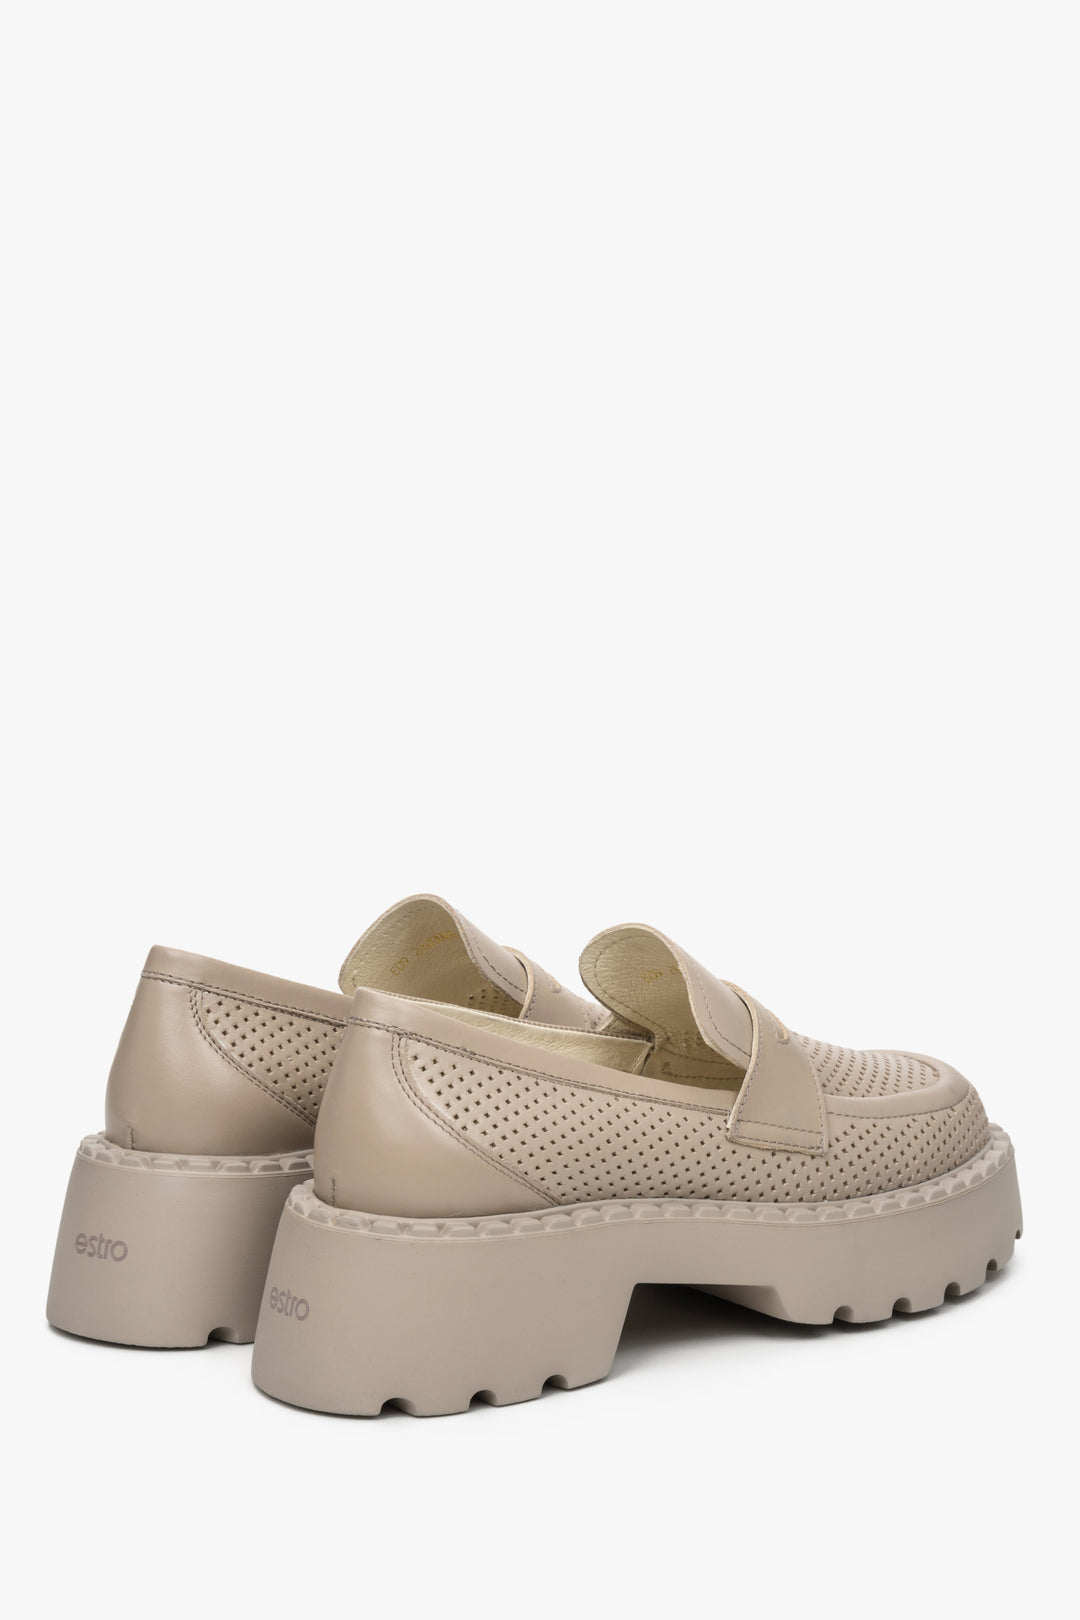 Leather moccasins for women in beige of Estro brand with perforation for summer - the presentation of the heel and side seam of the shoes.